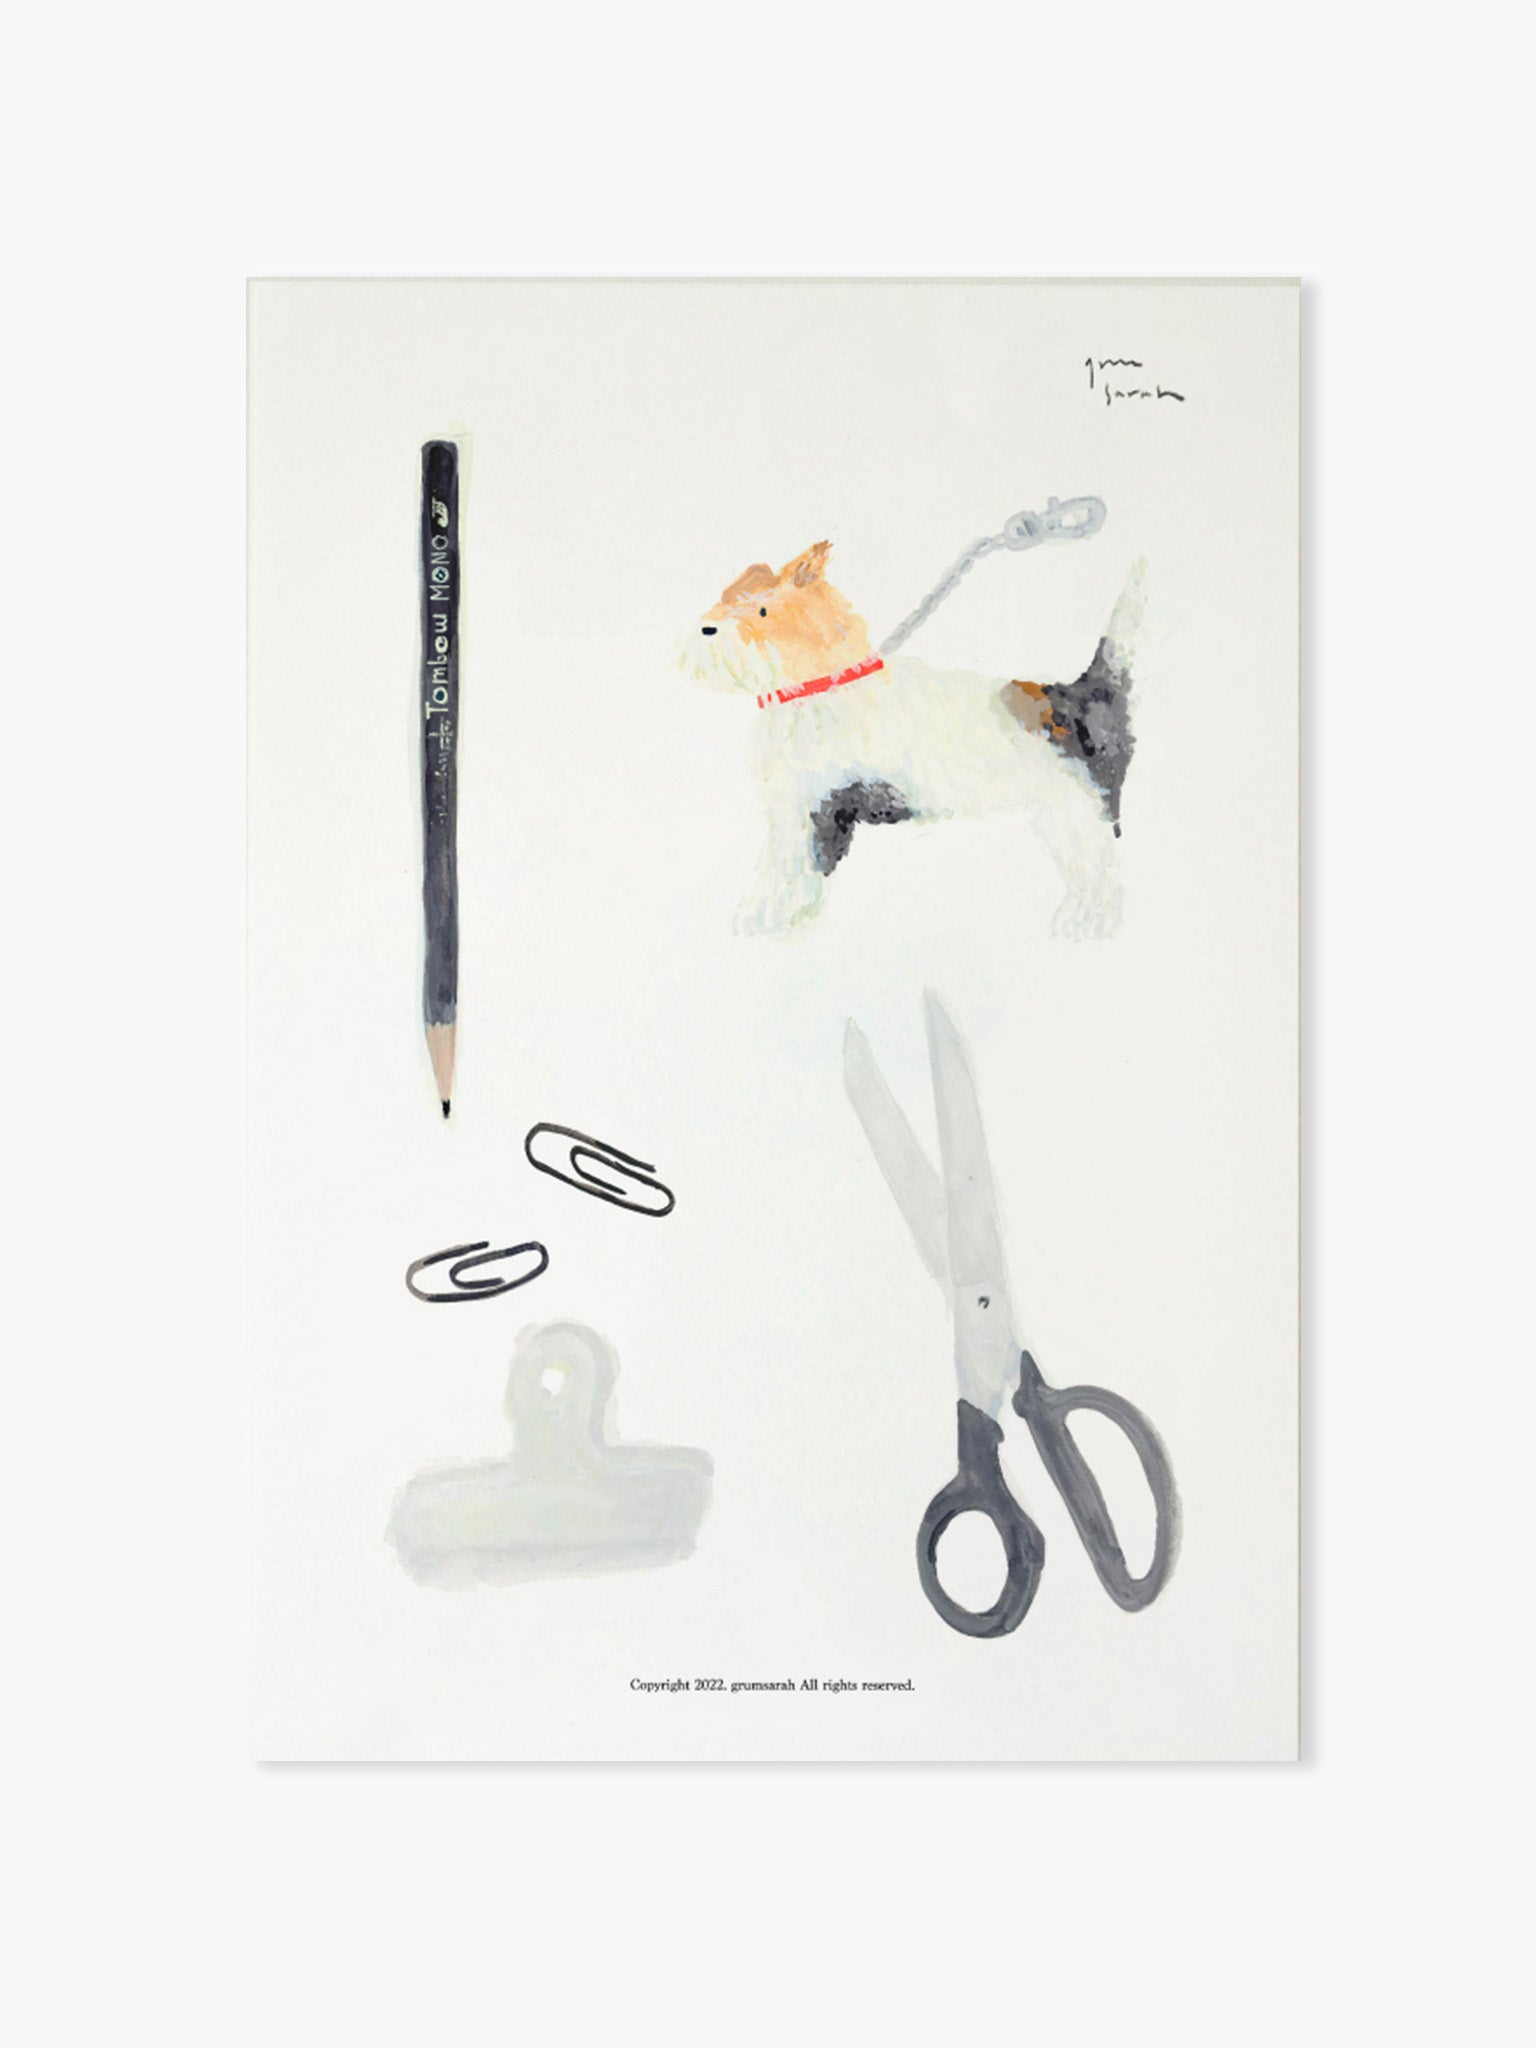 Pencil, Scissors Poster by grumsarah (A3)